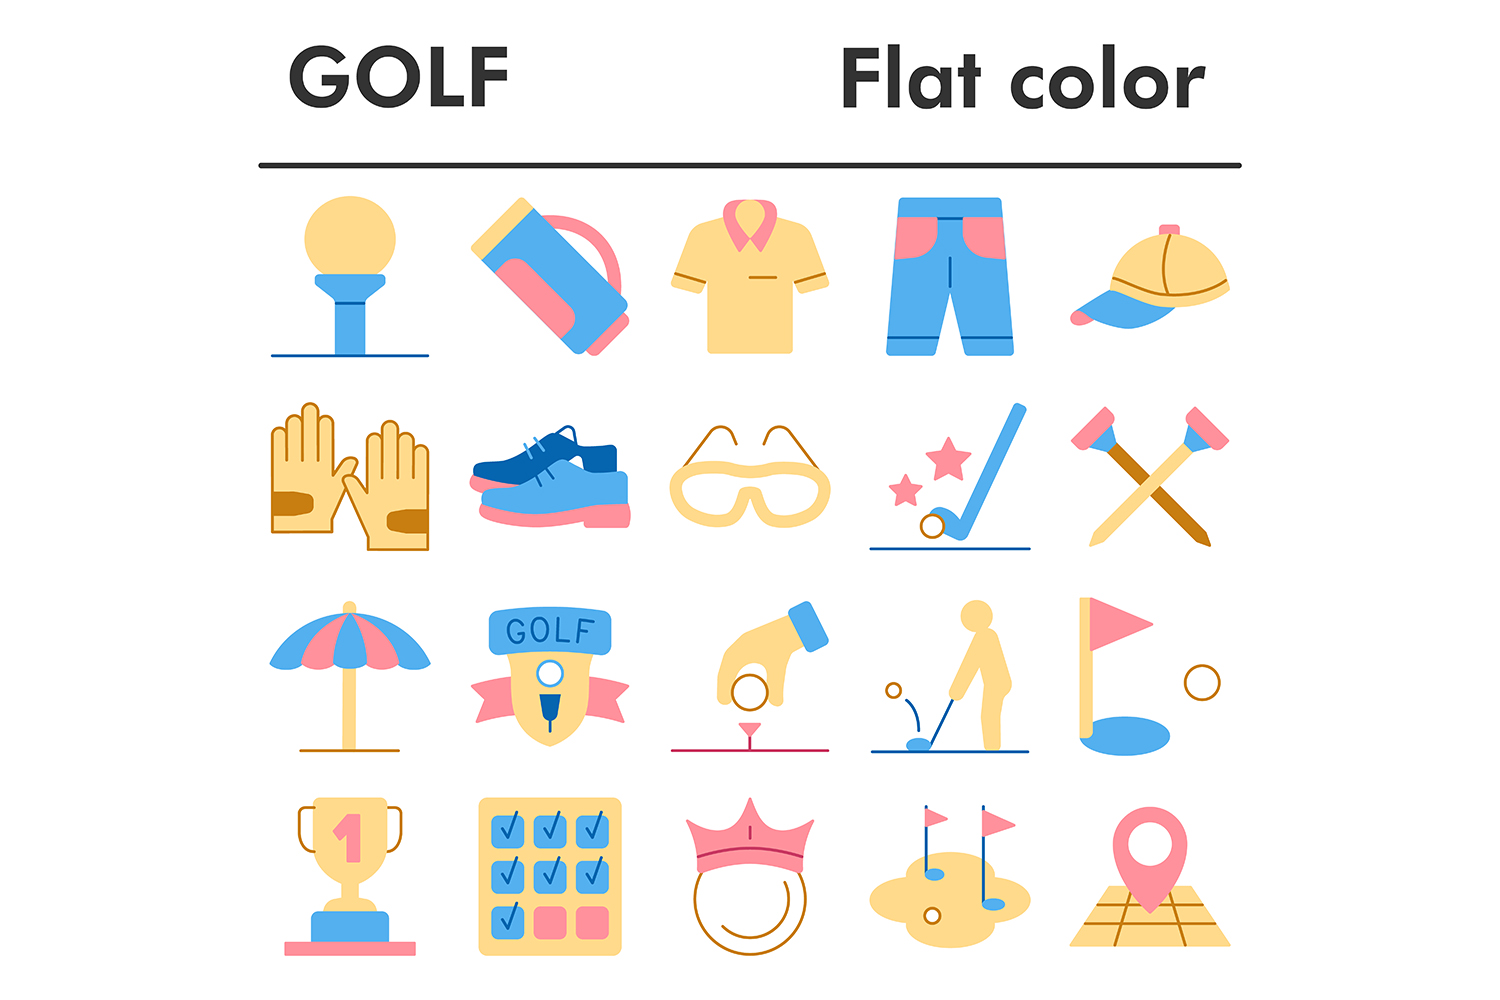 Golf icons set, flat color style pinterest preview image.